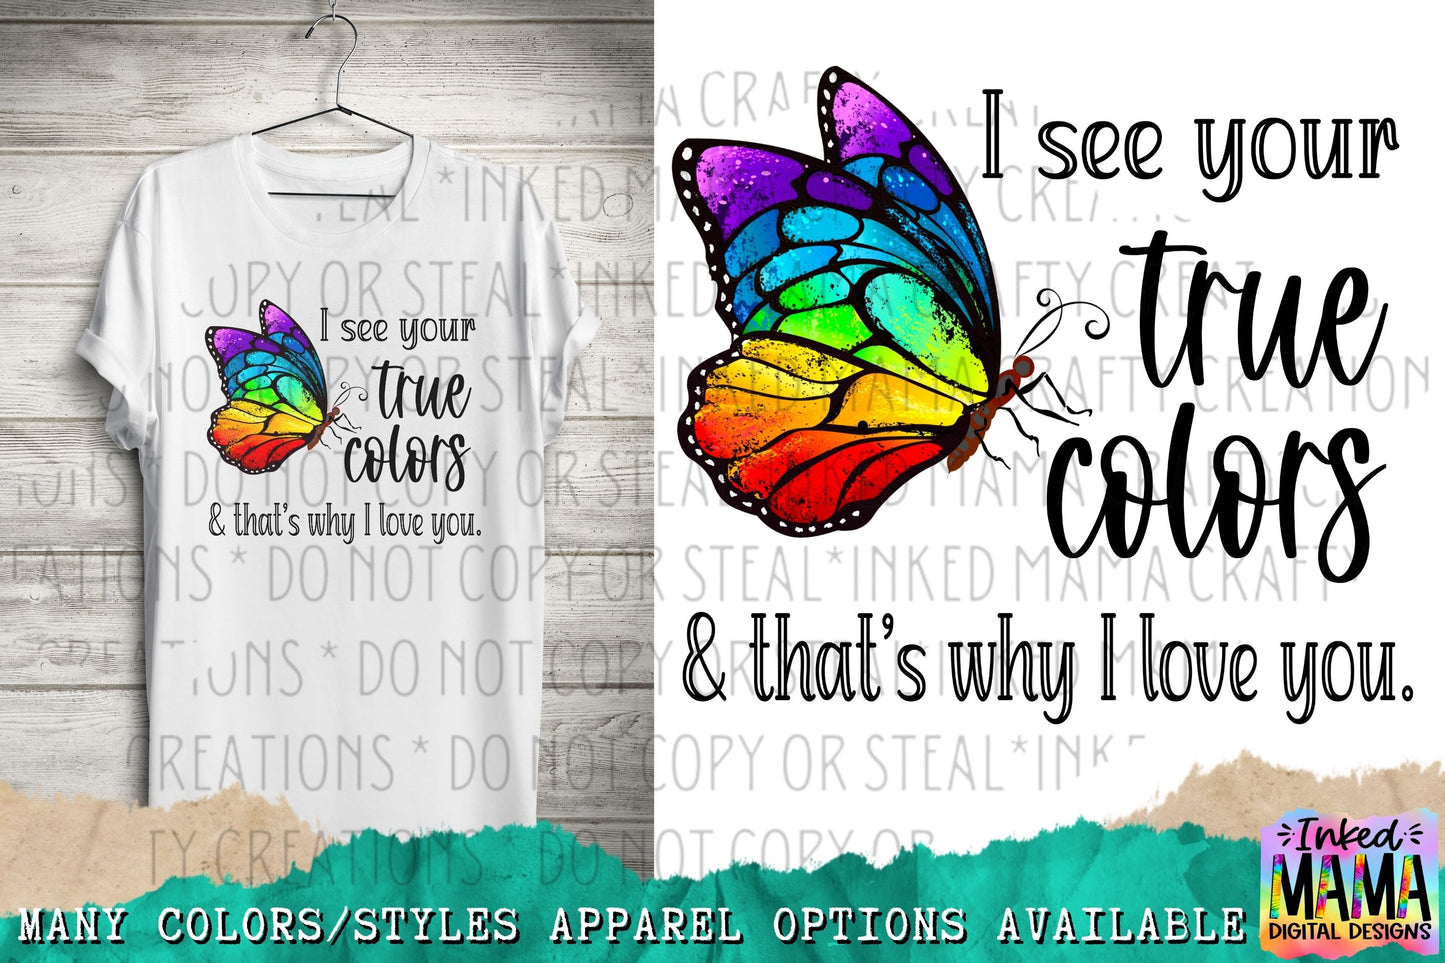 I see your true colors & that's why I love you - LGBTQIA+ PRIDE Apparel